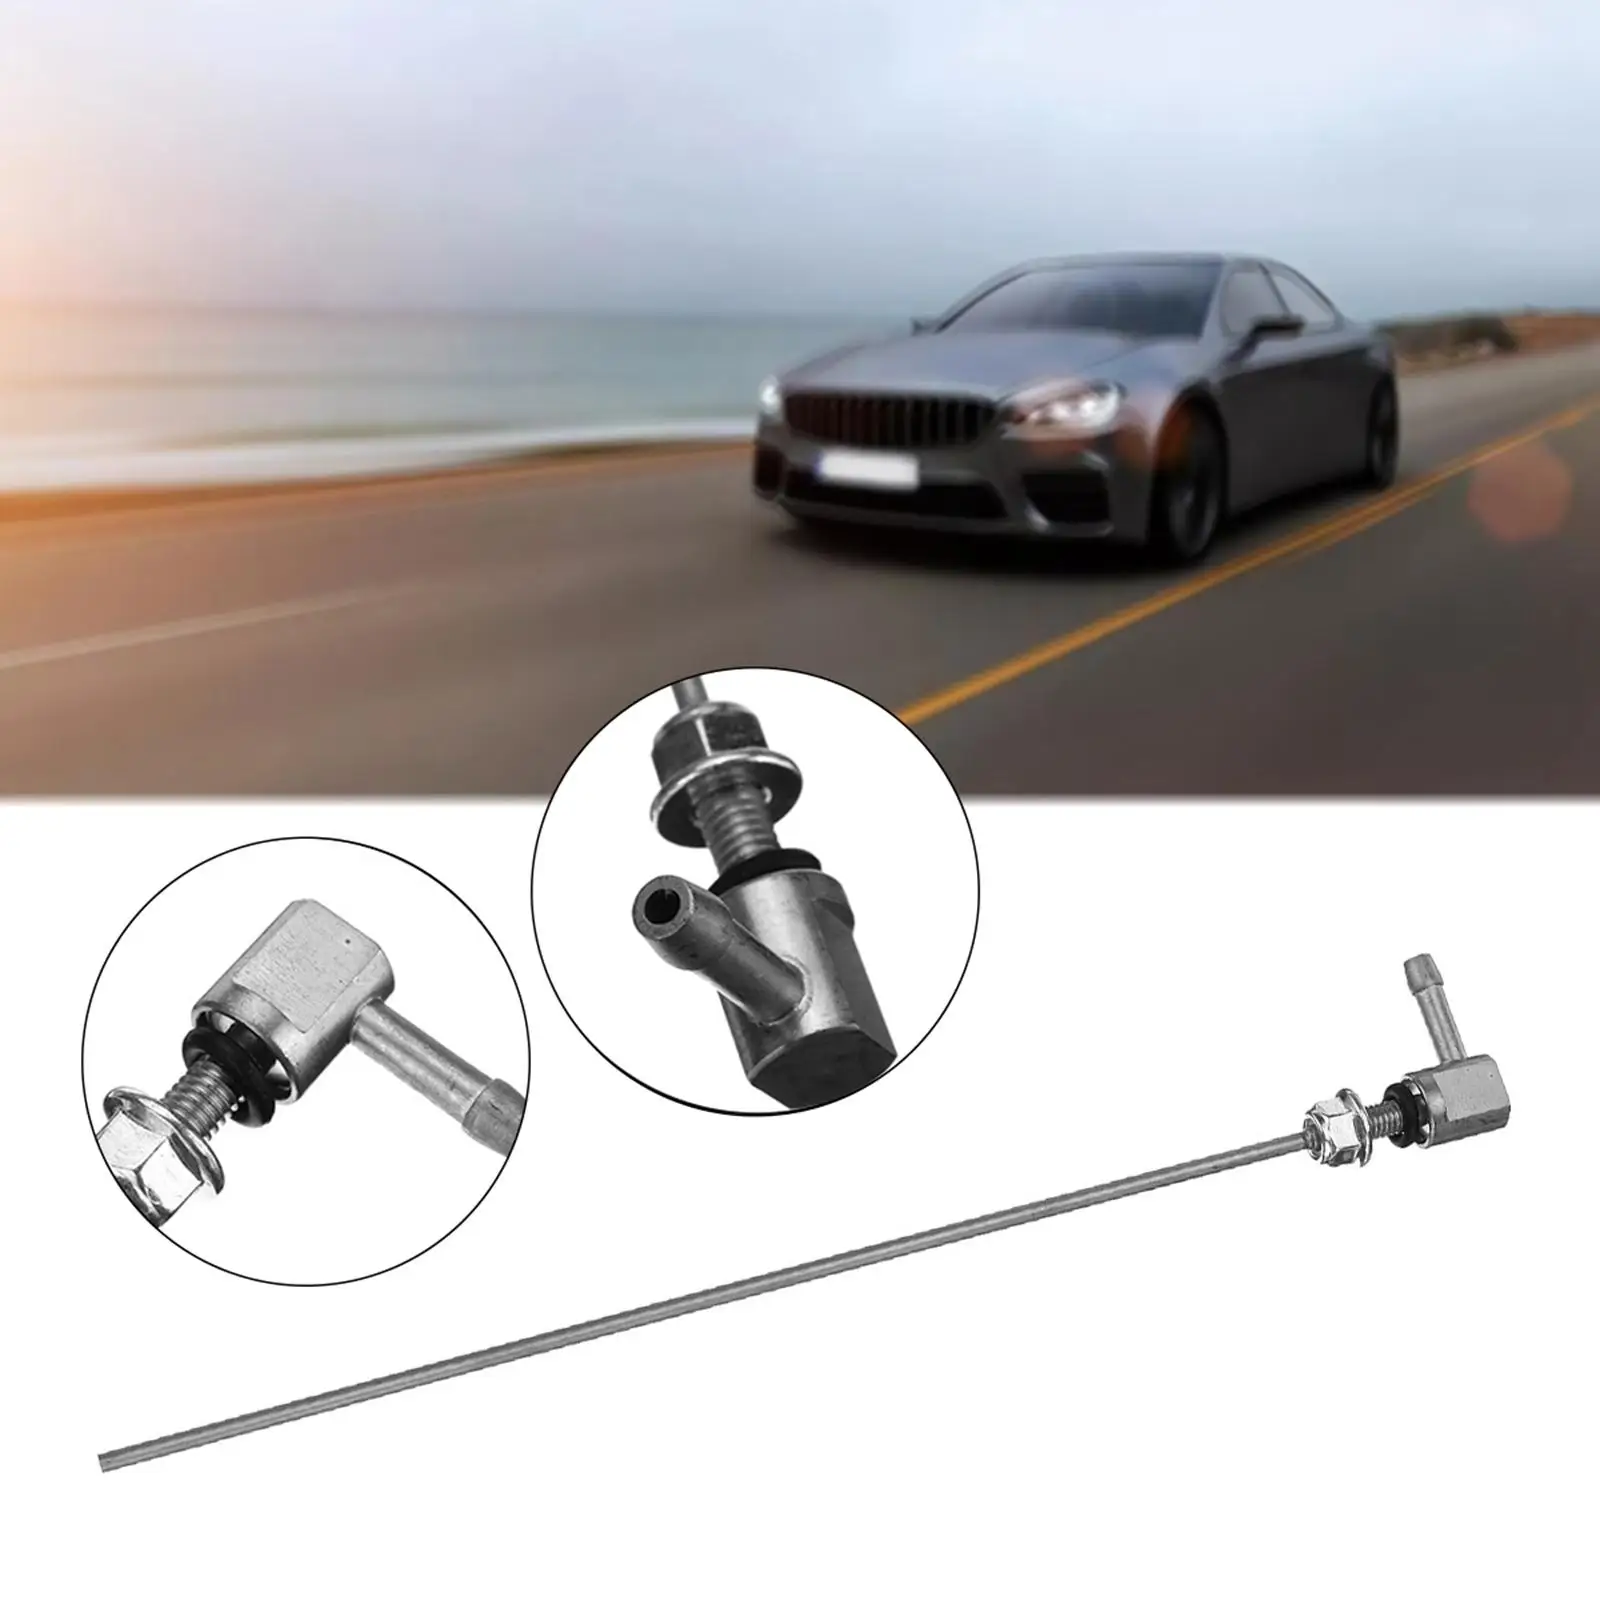 Car Parking Fuel Tank Standpipe Hose Clamp Accessories for 